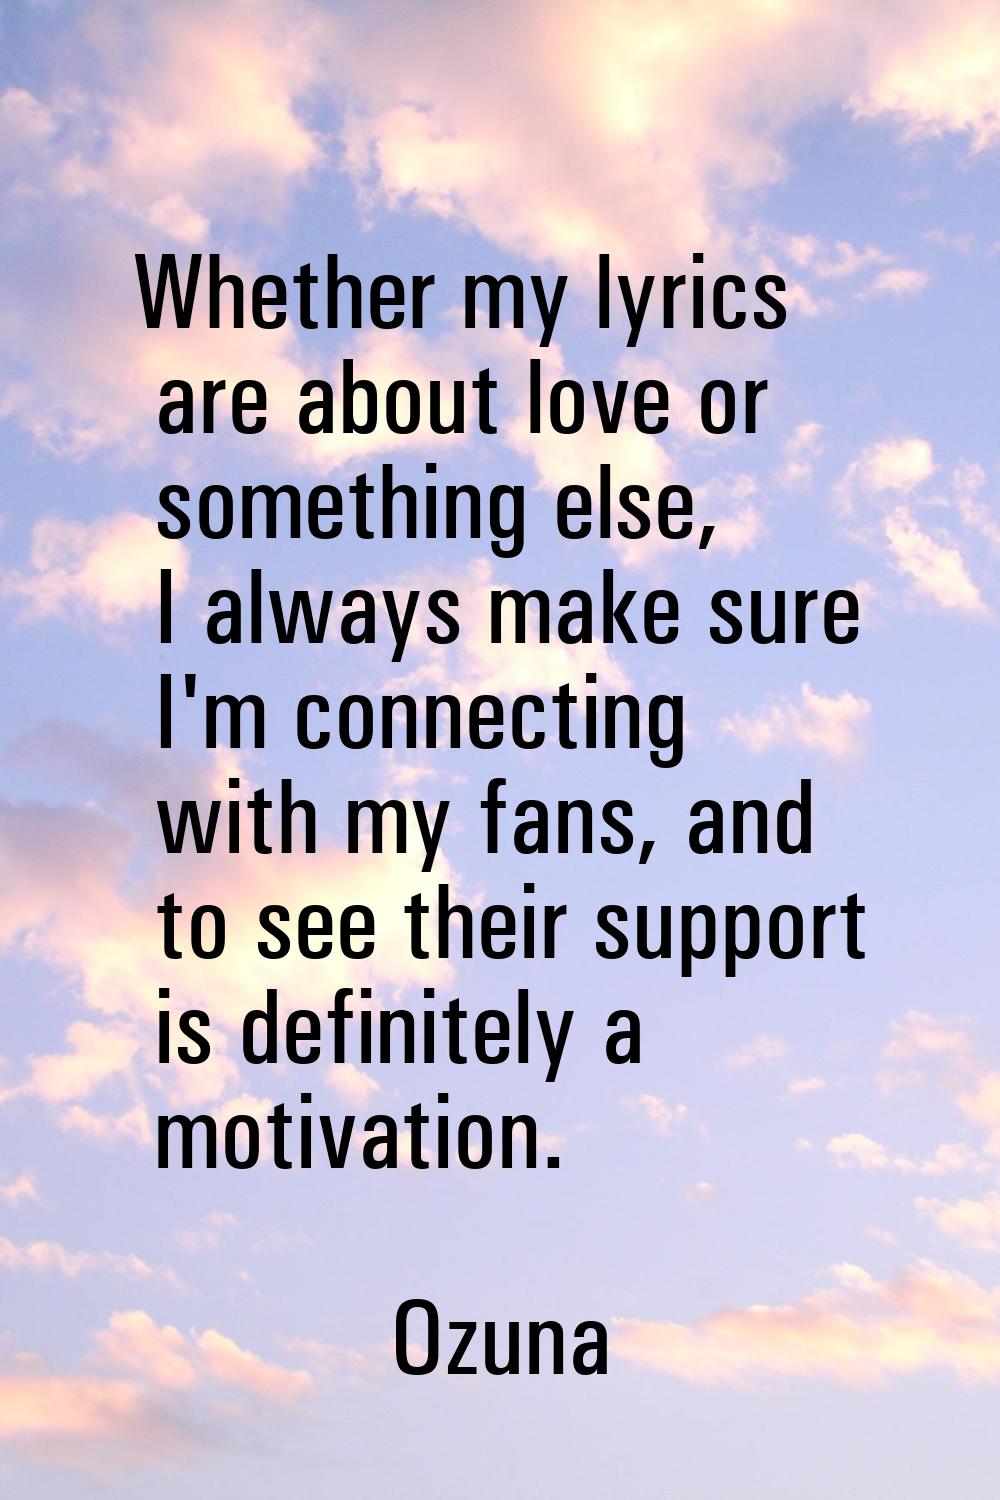 Whether my lyrics are about love or something else, I always make sure I'm connecting with my fans,